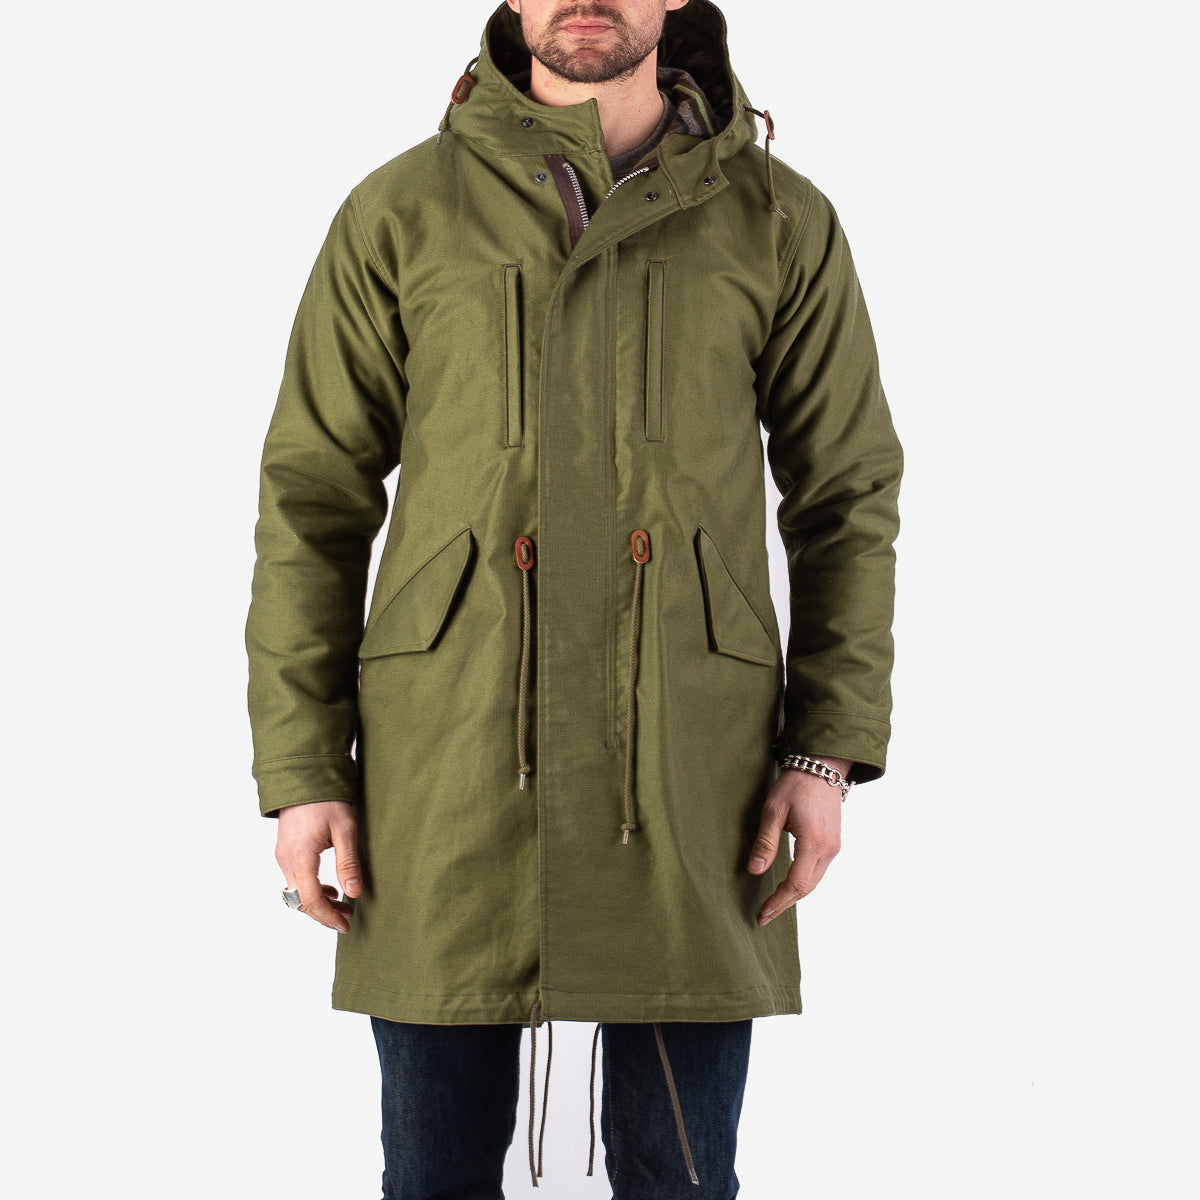 Iron Heart M-51 Coat Whipcord – Drab Field IHM-34 Olive